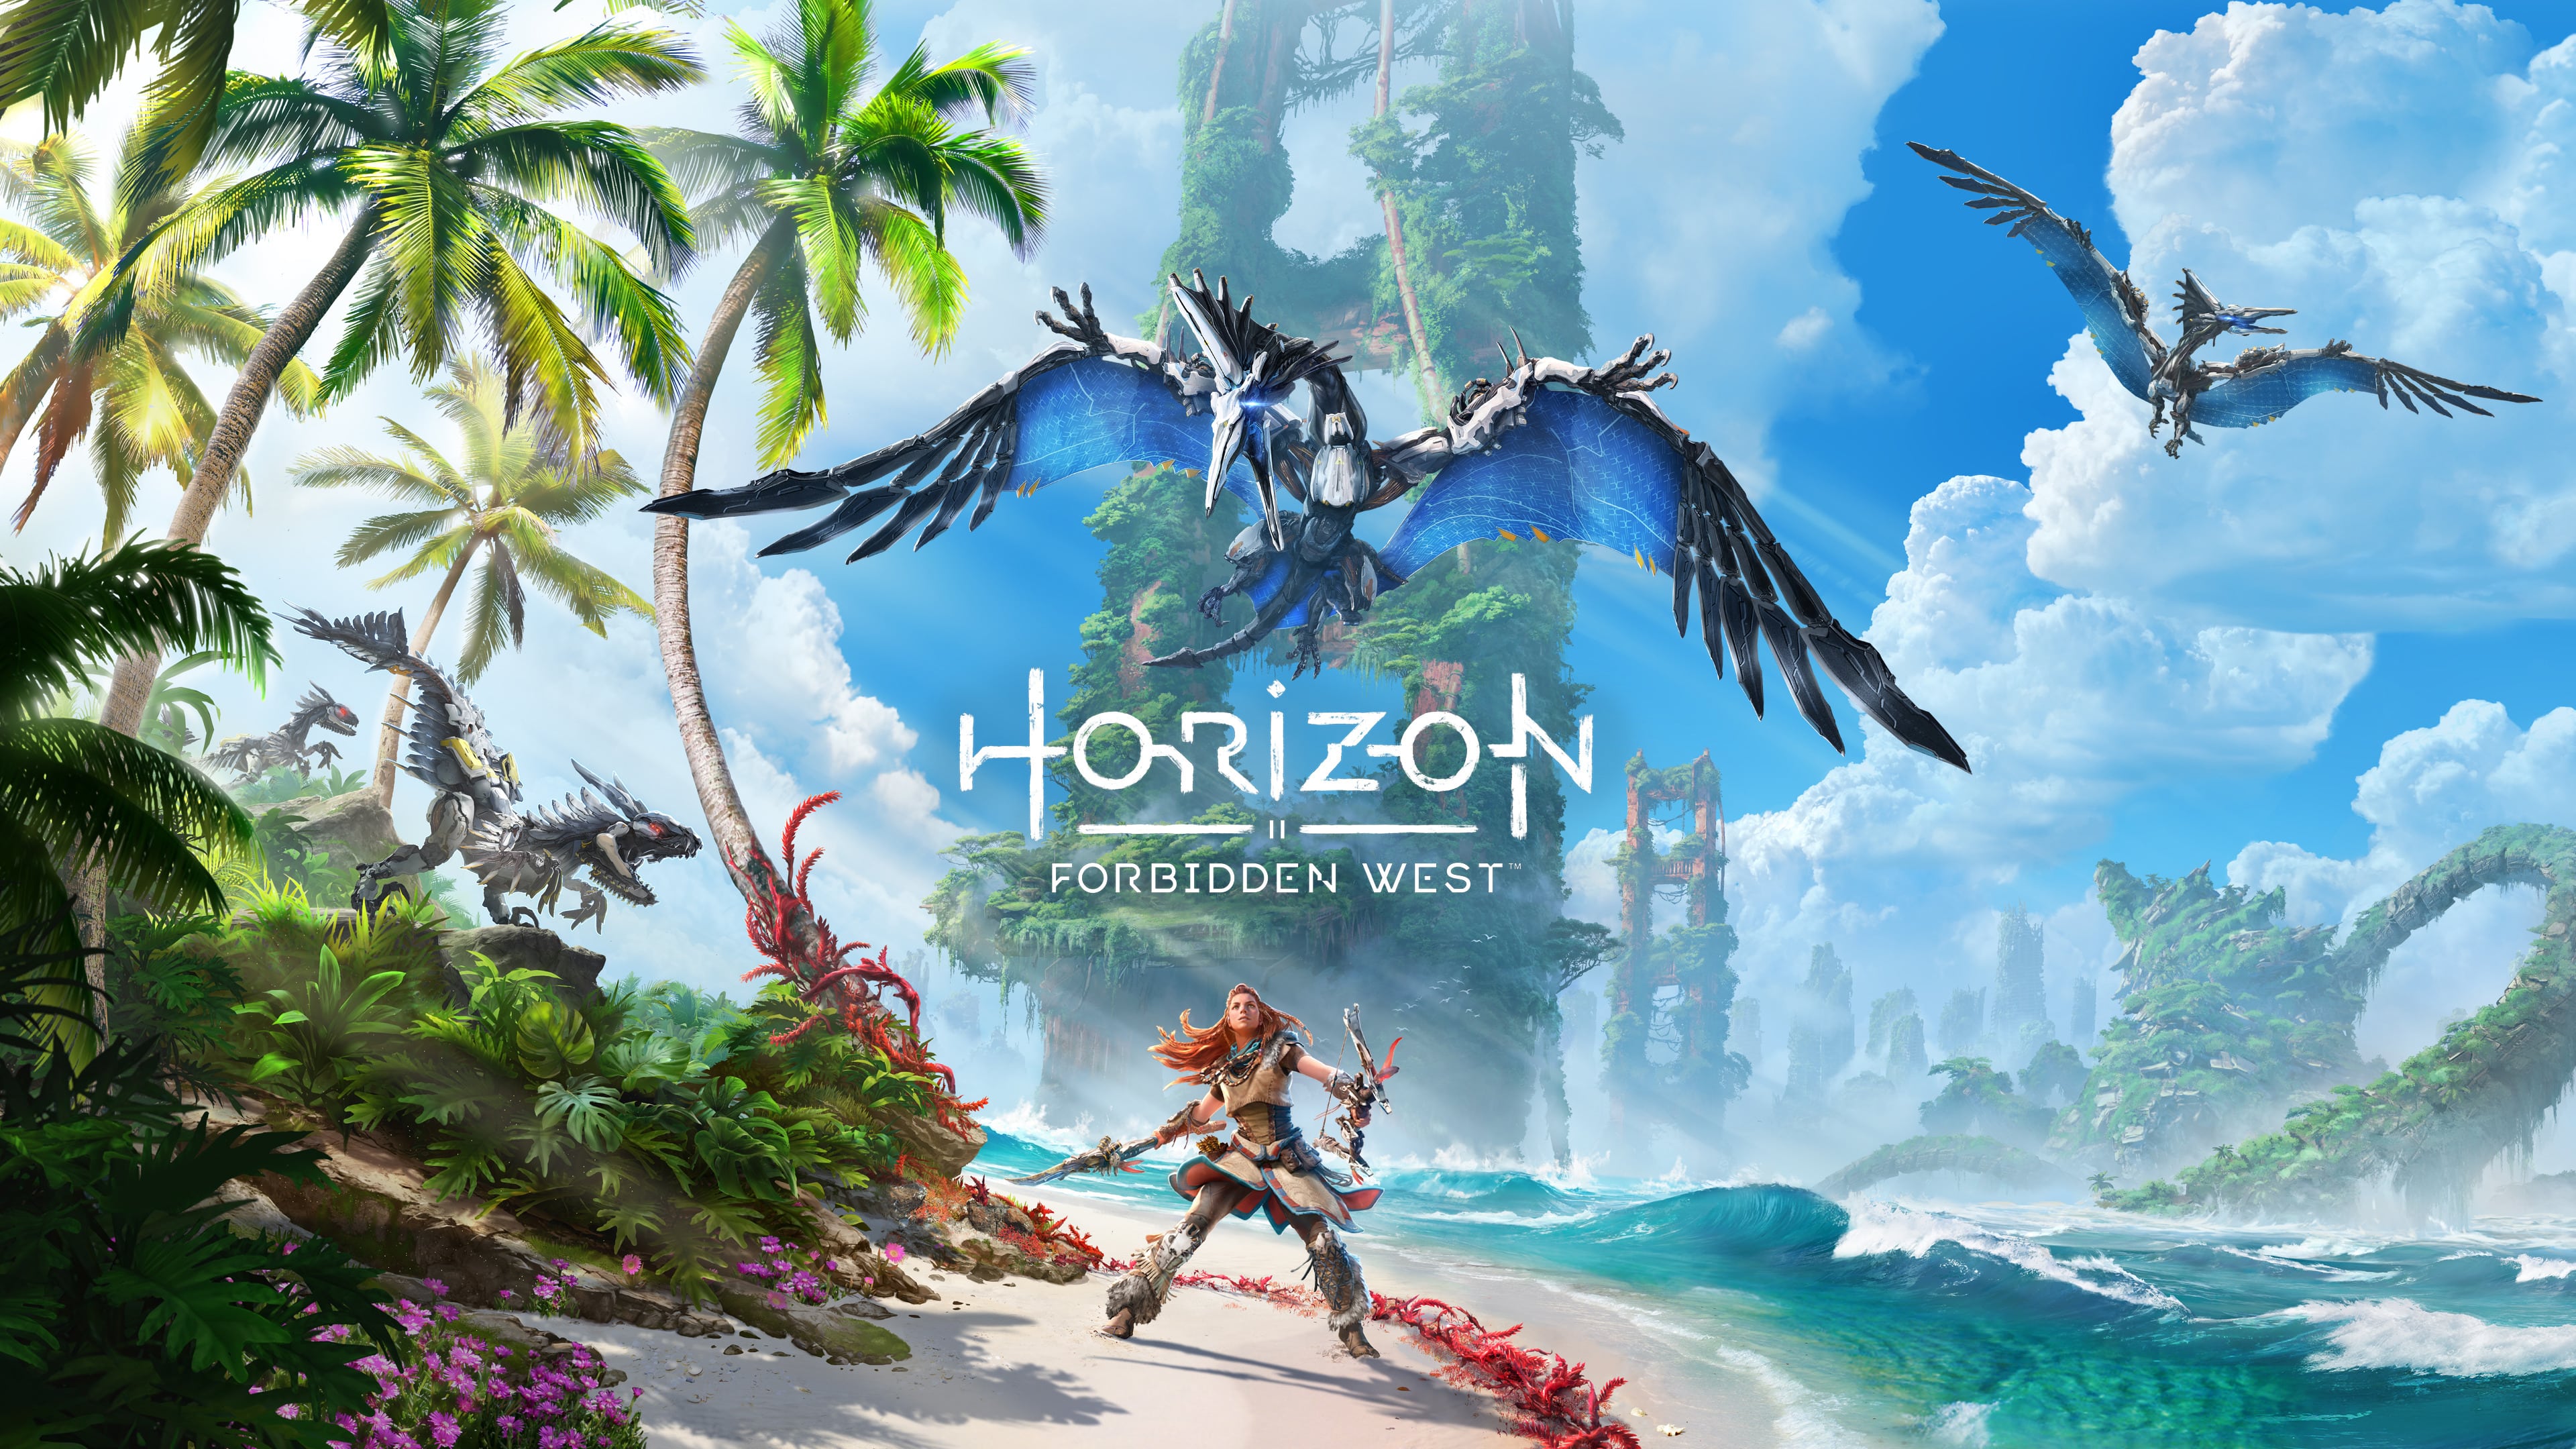 Horizon Forbidden West: Complete Edition is coming to PS5 and PC